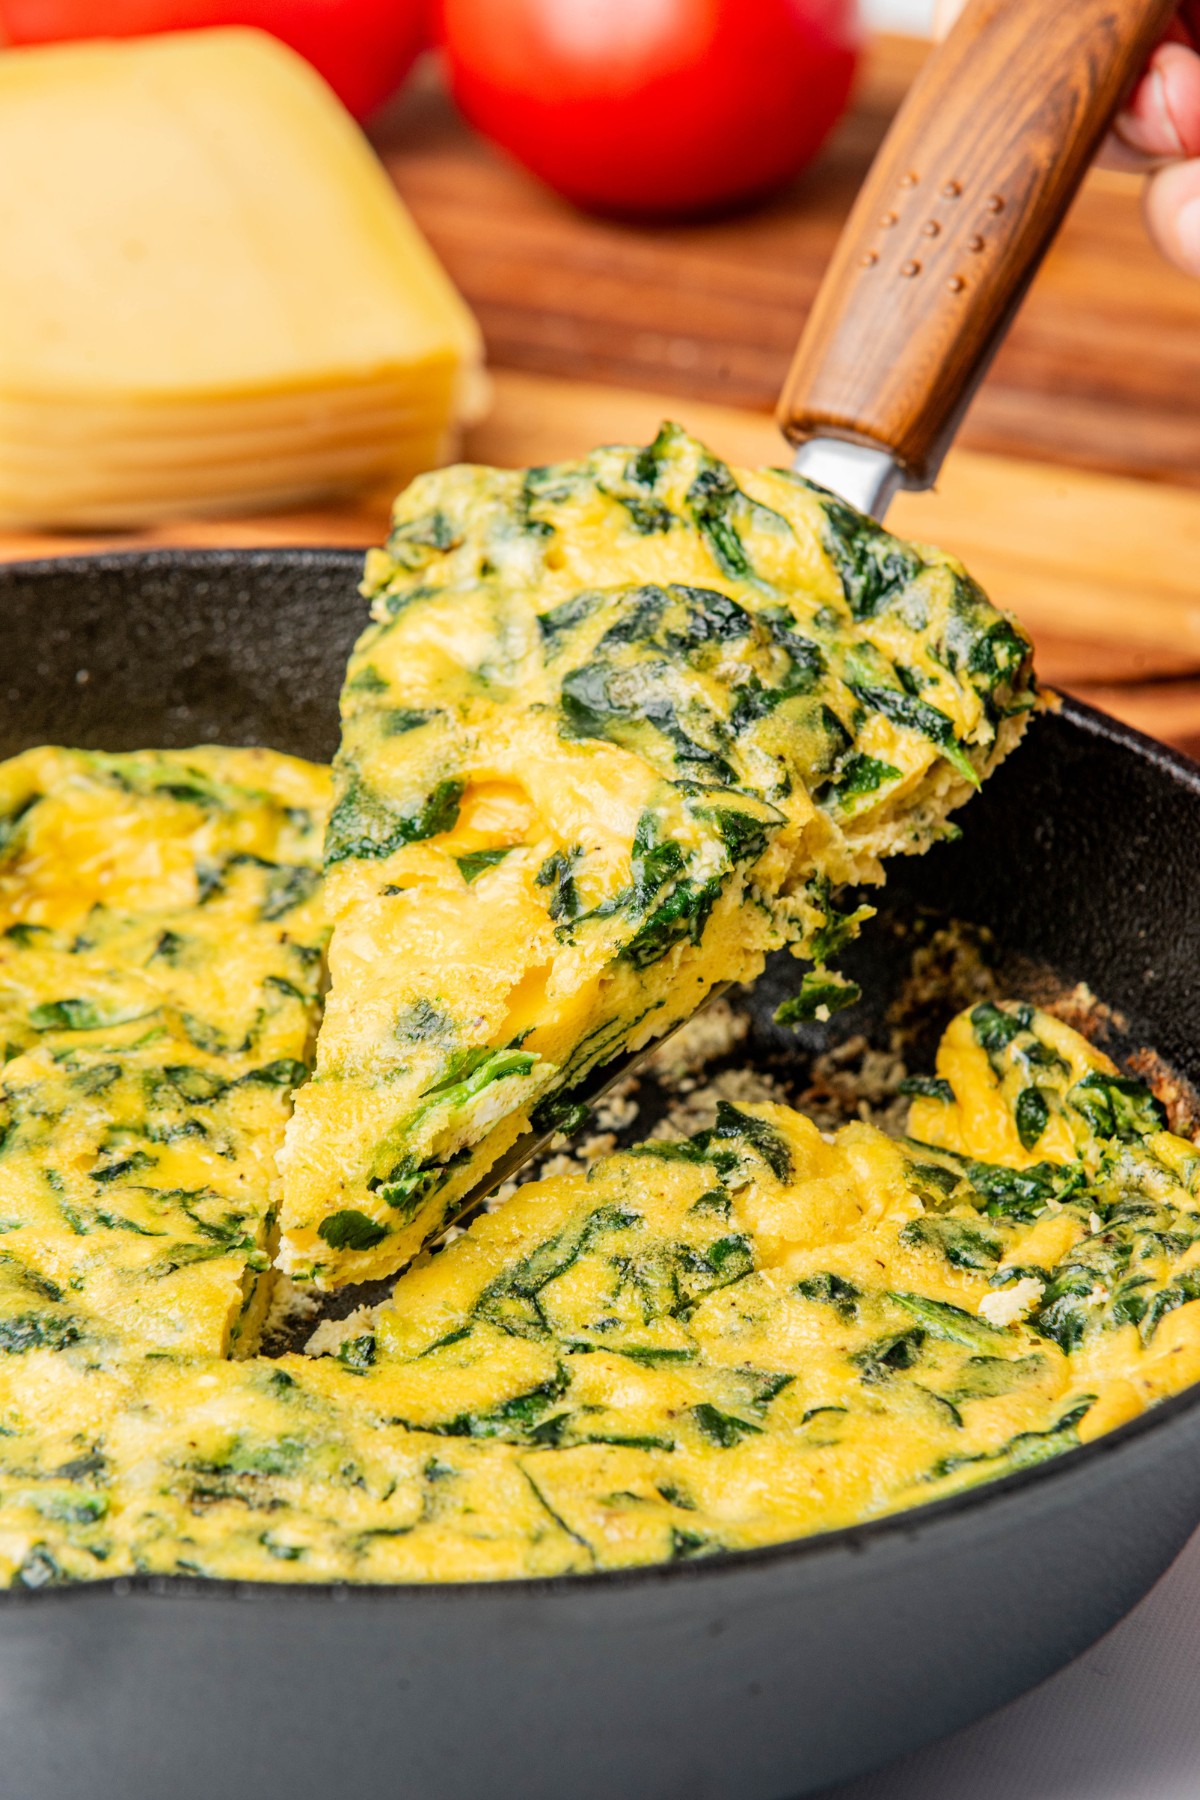 cutting a slice of egg frittata to serve.